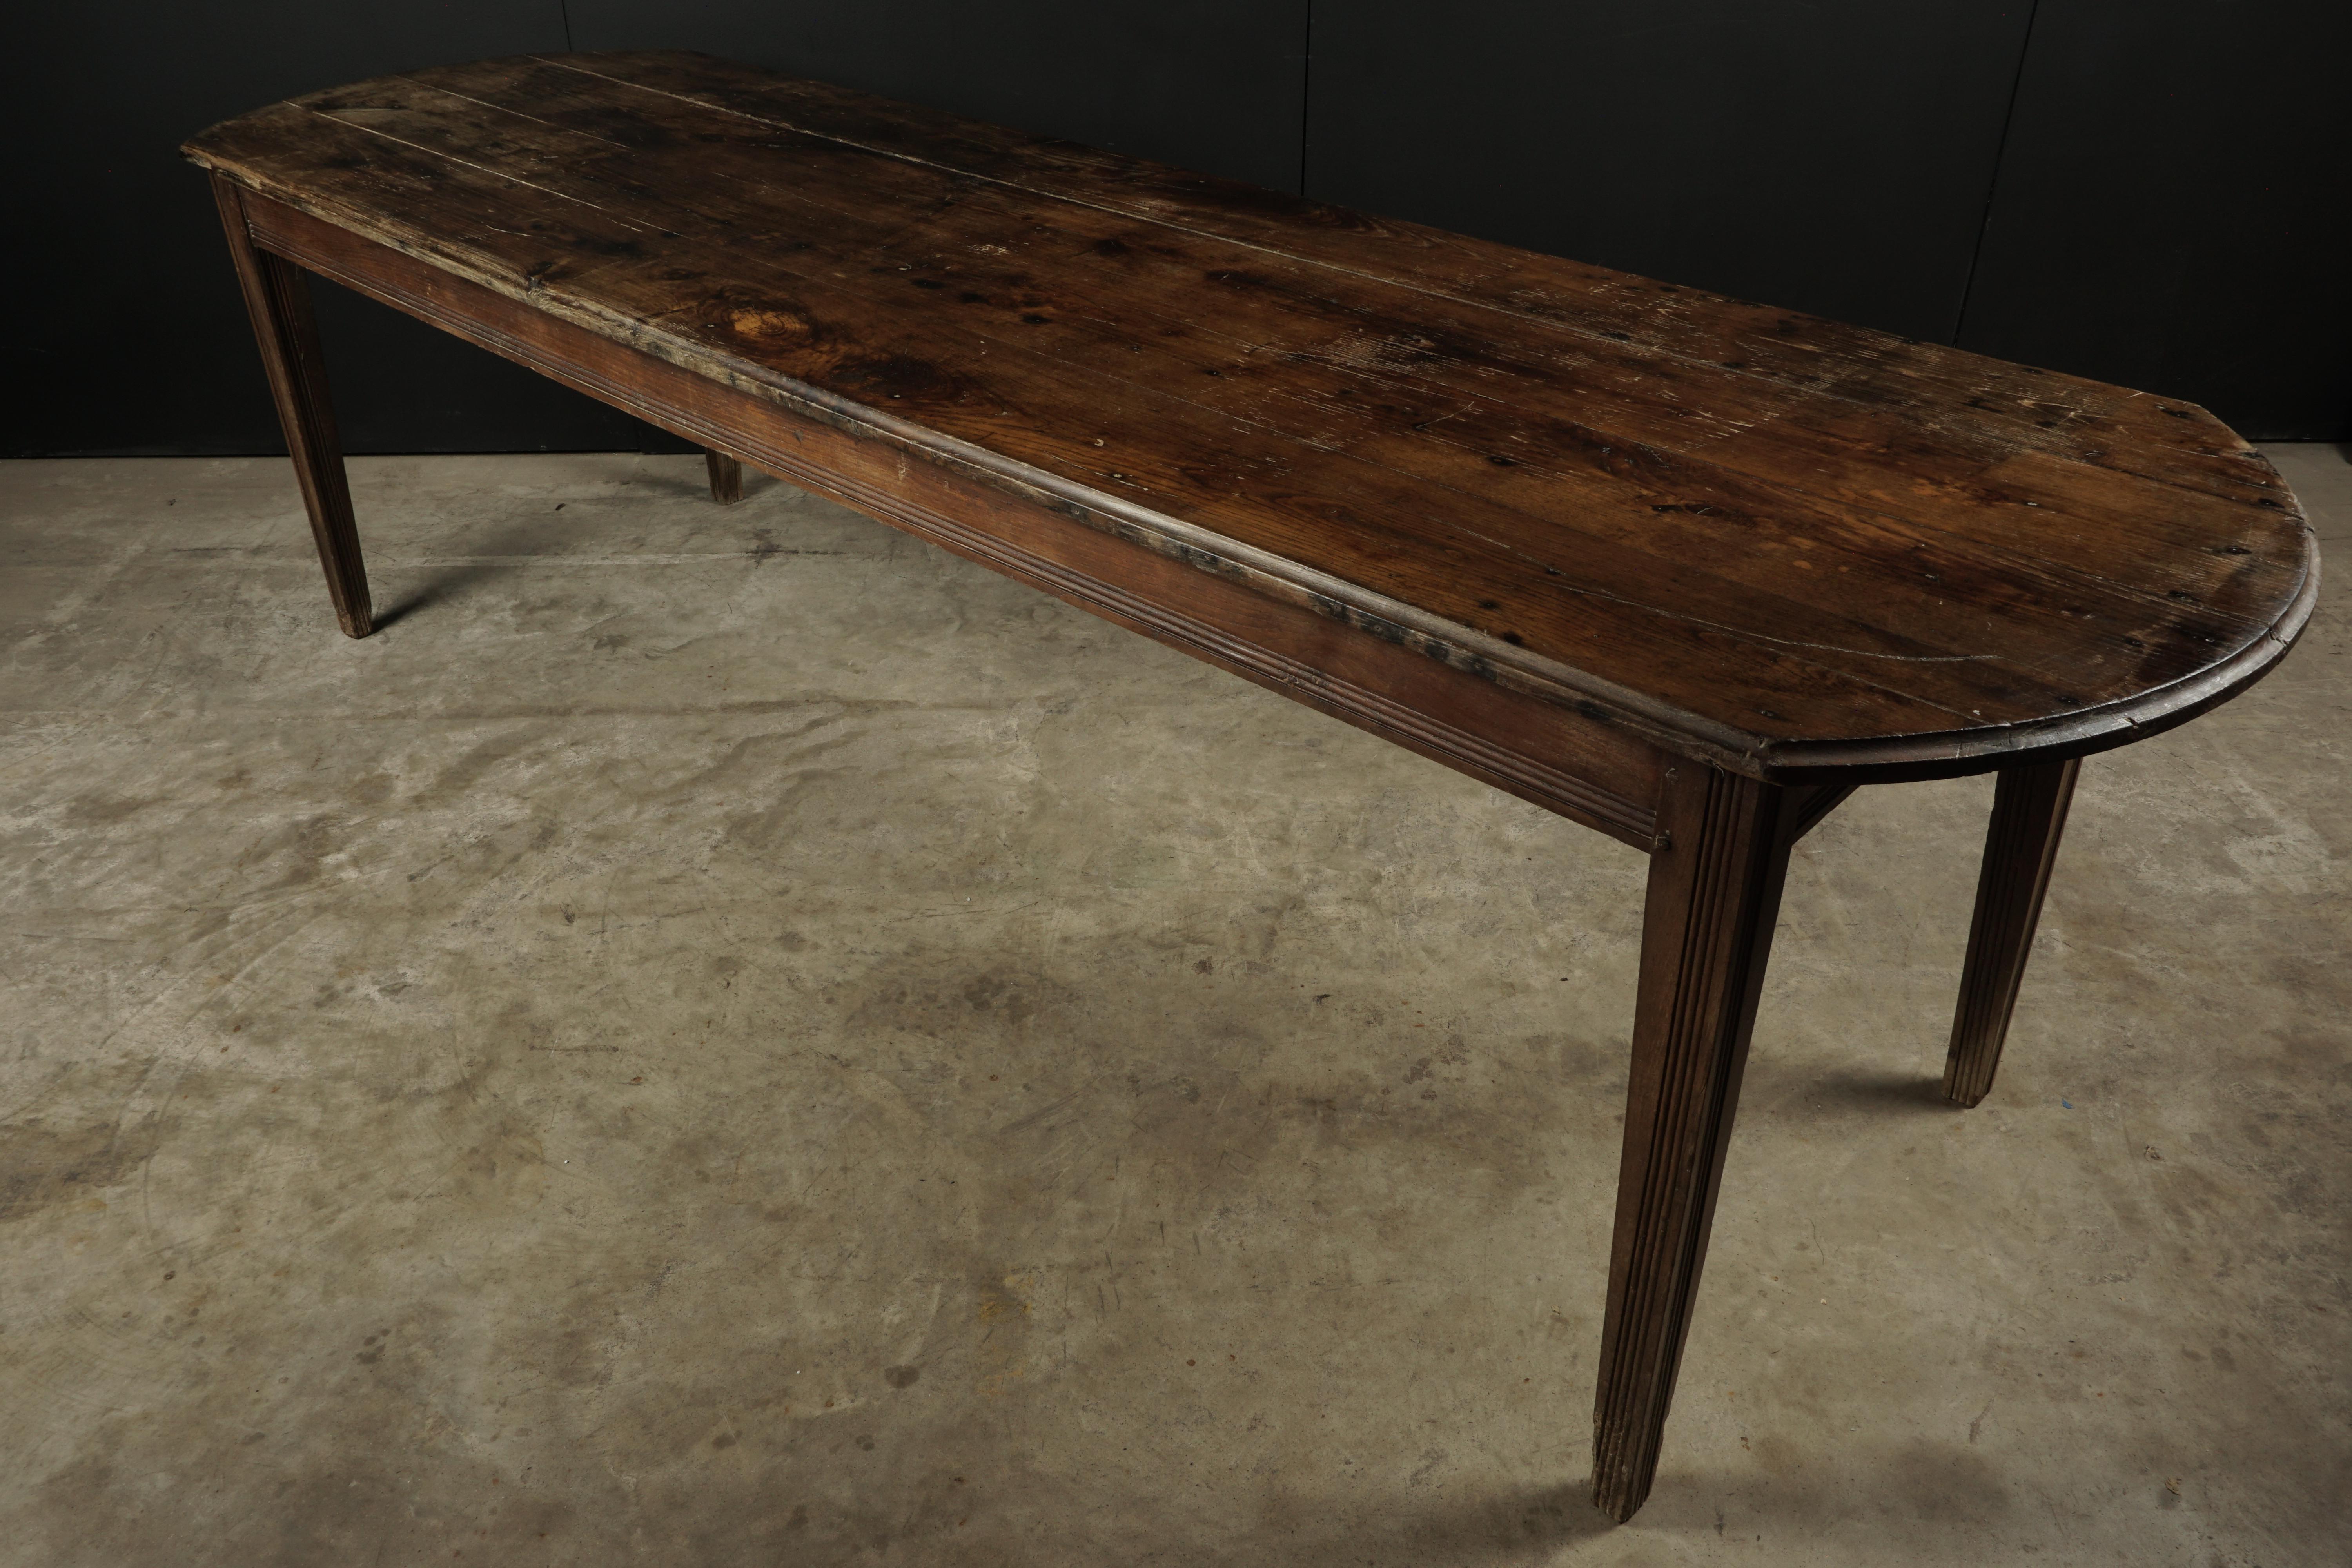 Large farm table from France, circa 1930. Solid pine construction with tapered feet. Great patina.